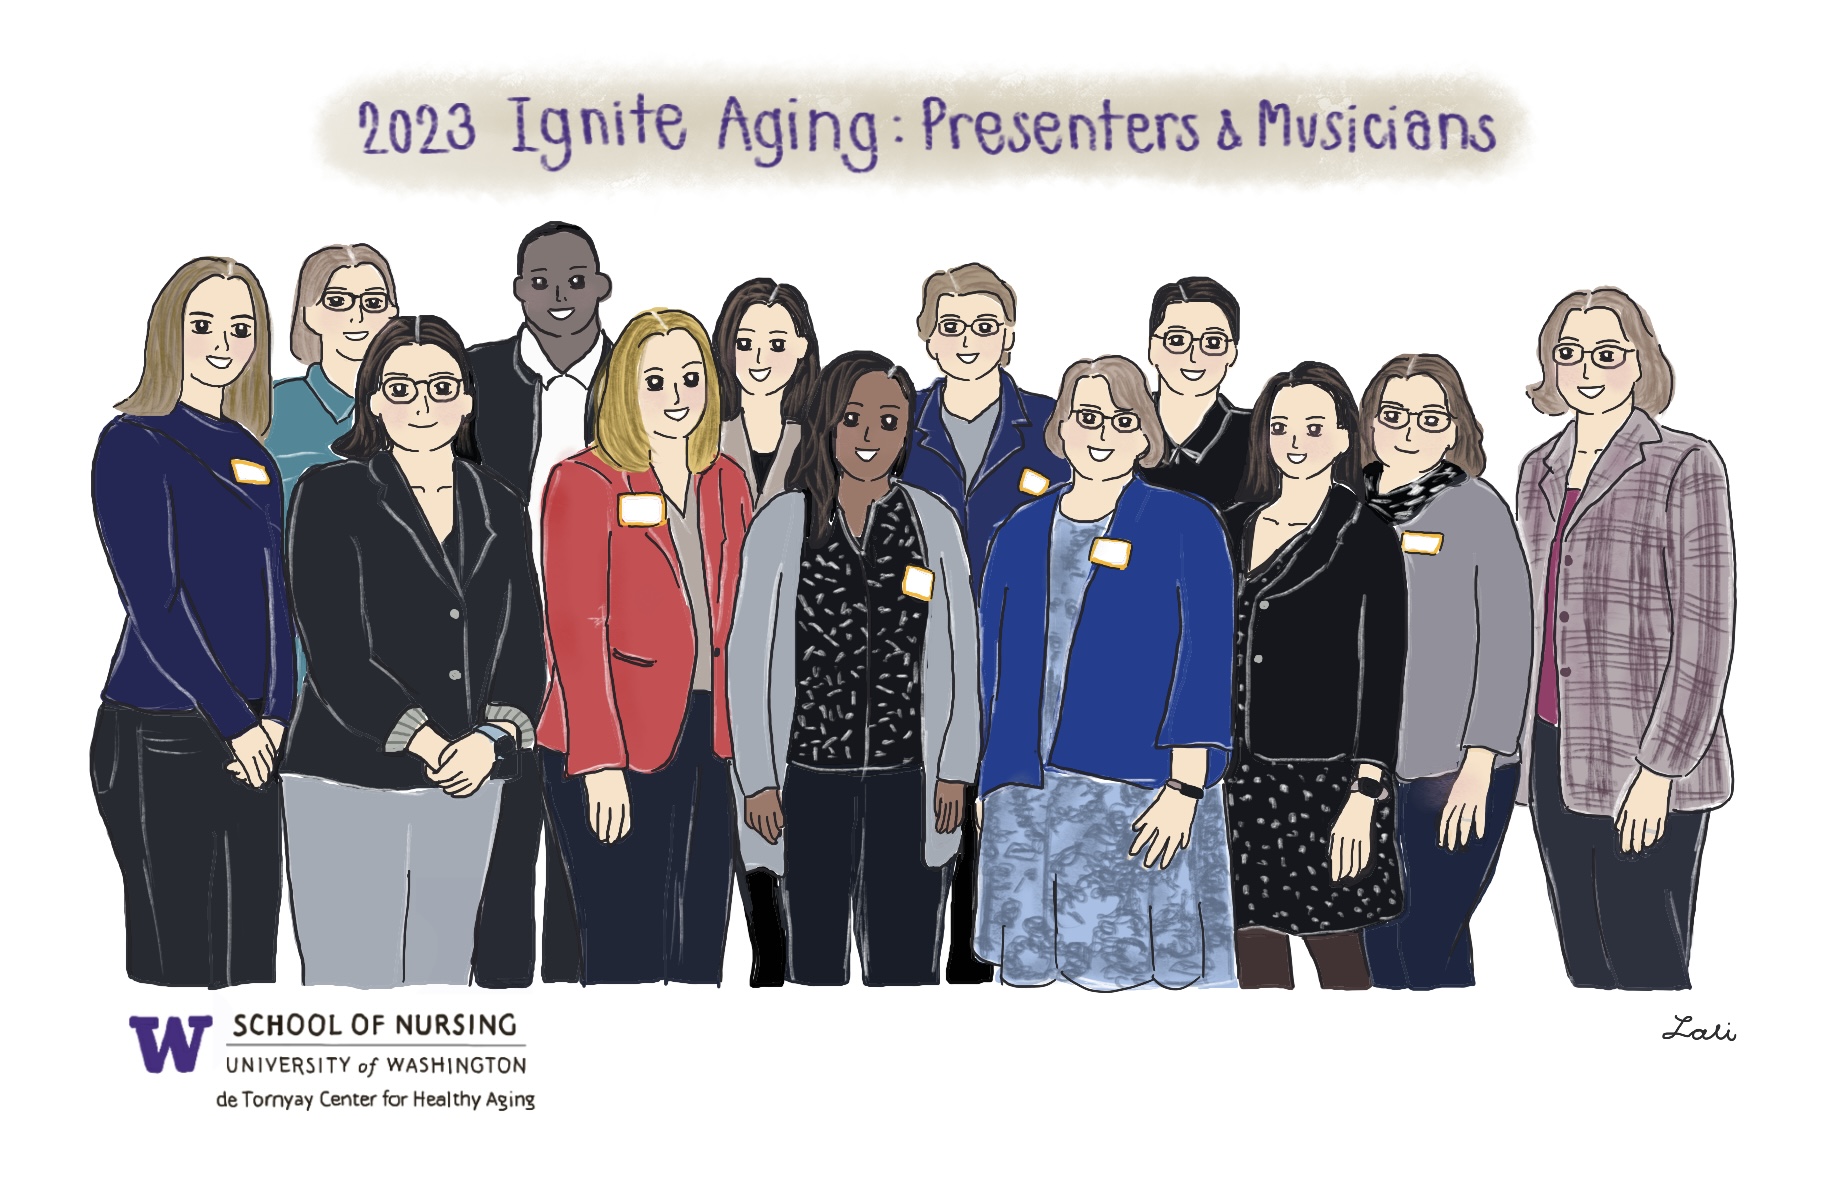 Ignite Aging presenters and musicians illustrated